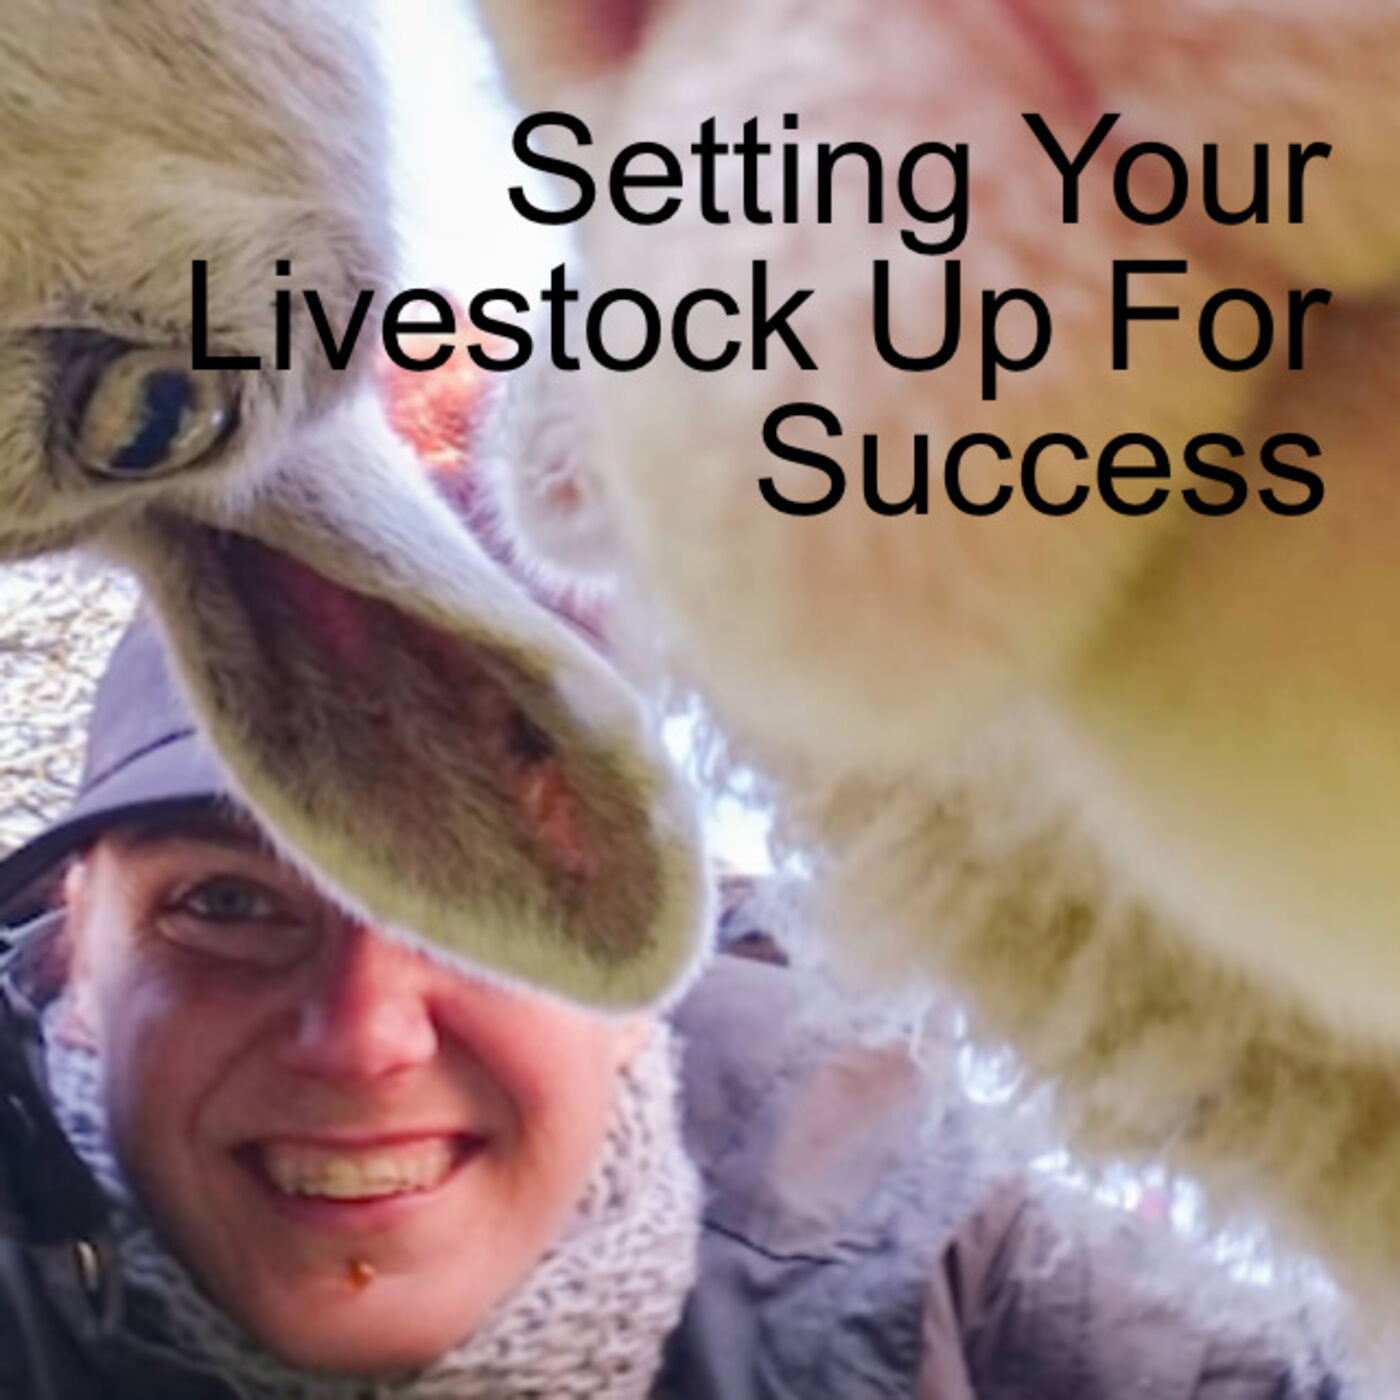 Setting Your Livestock Up For Success